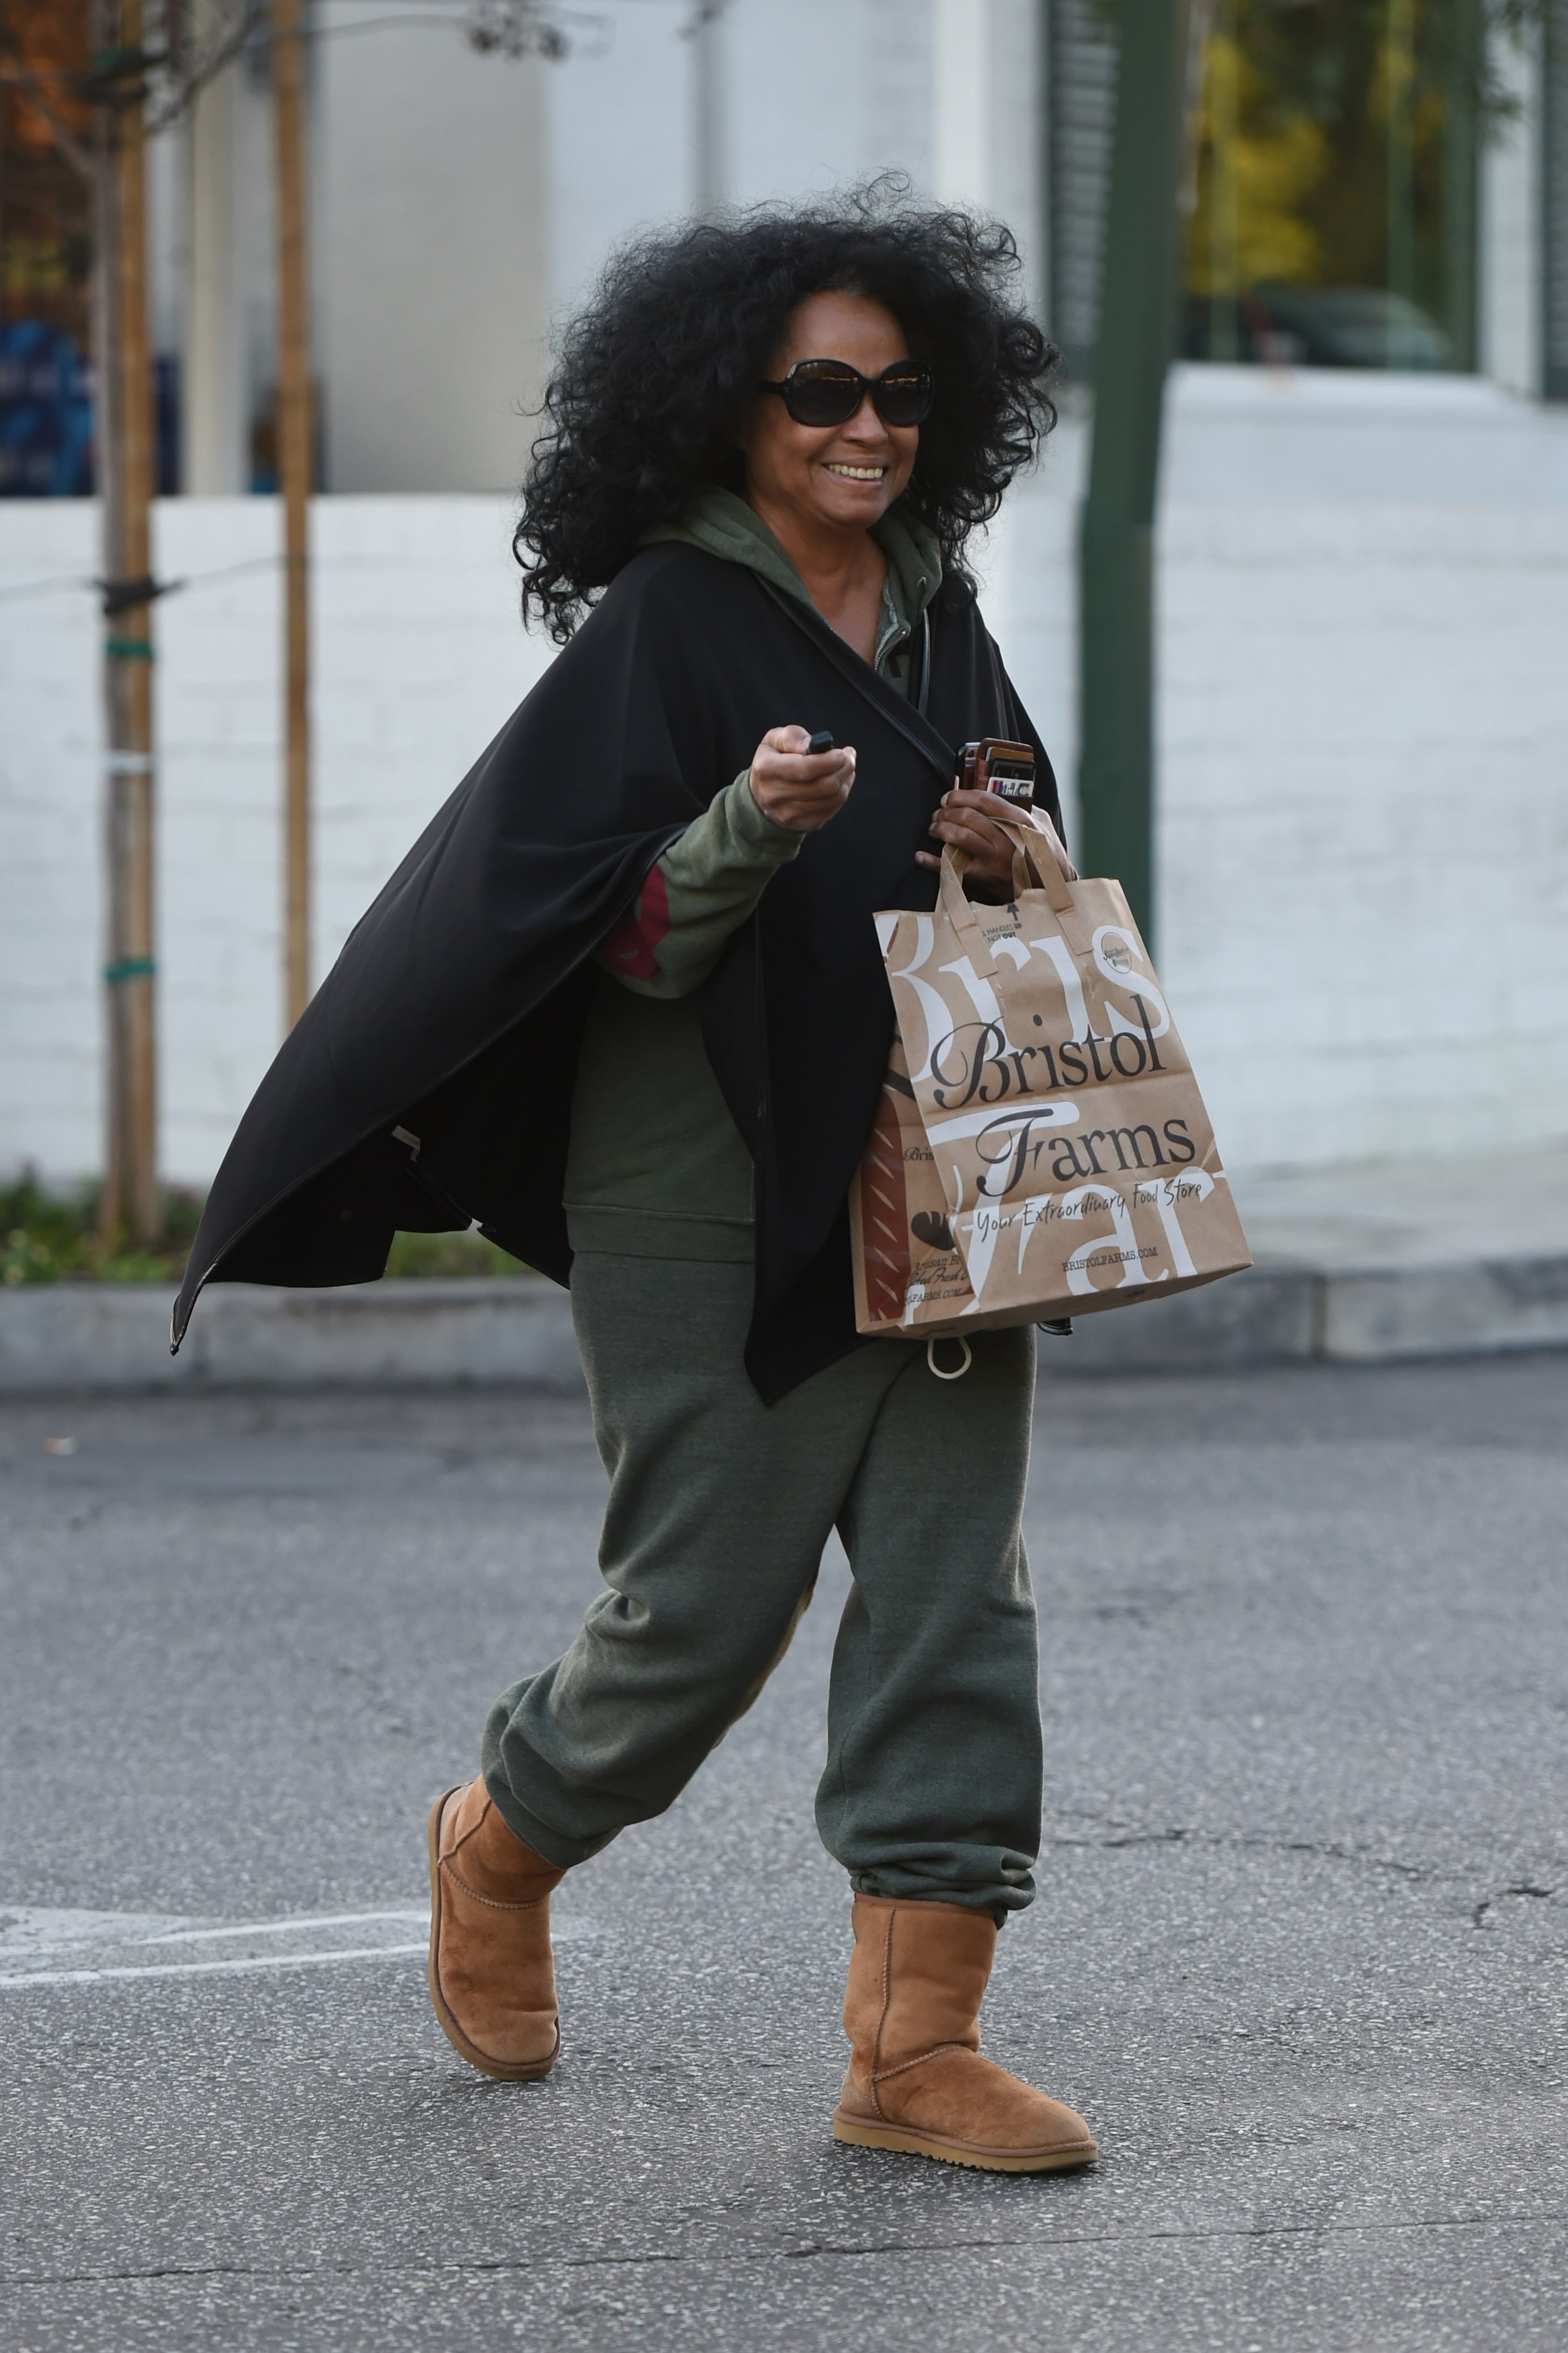 Uggs Are In Style Again, Thanks To Celebrities  COVID